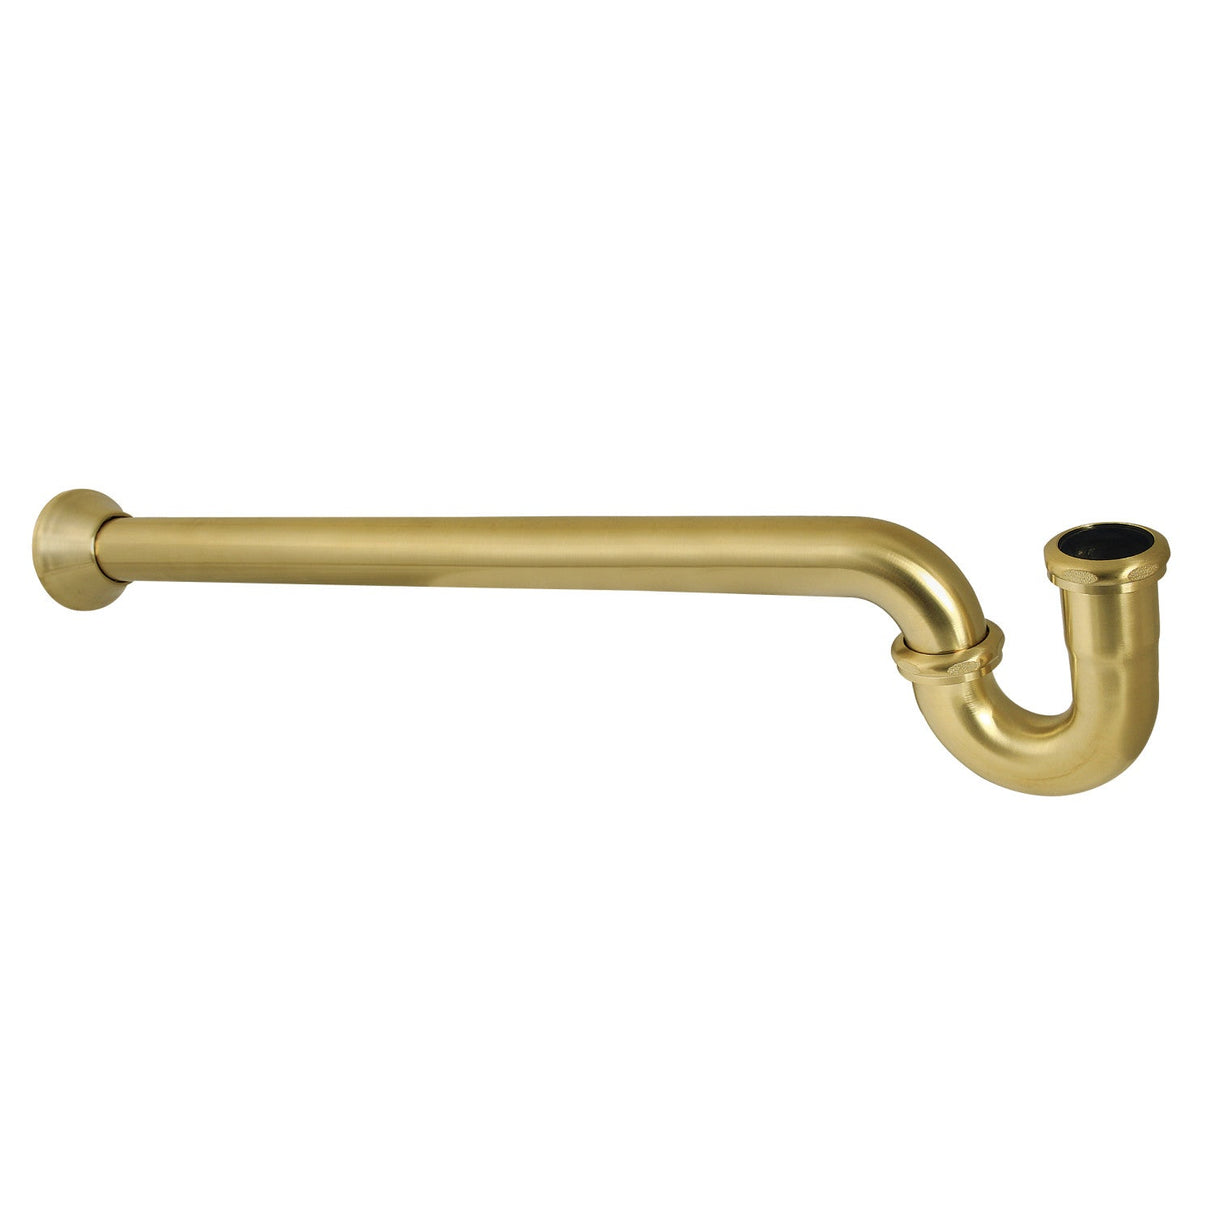 Vintage CC7187 1-1/4 Inch Decor P-Trap with Bell Flange, 18 Inch Length, 18 Gauge, Brushed Brass